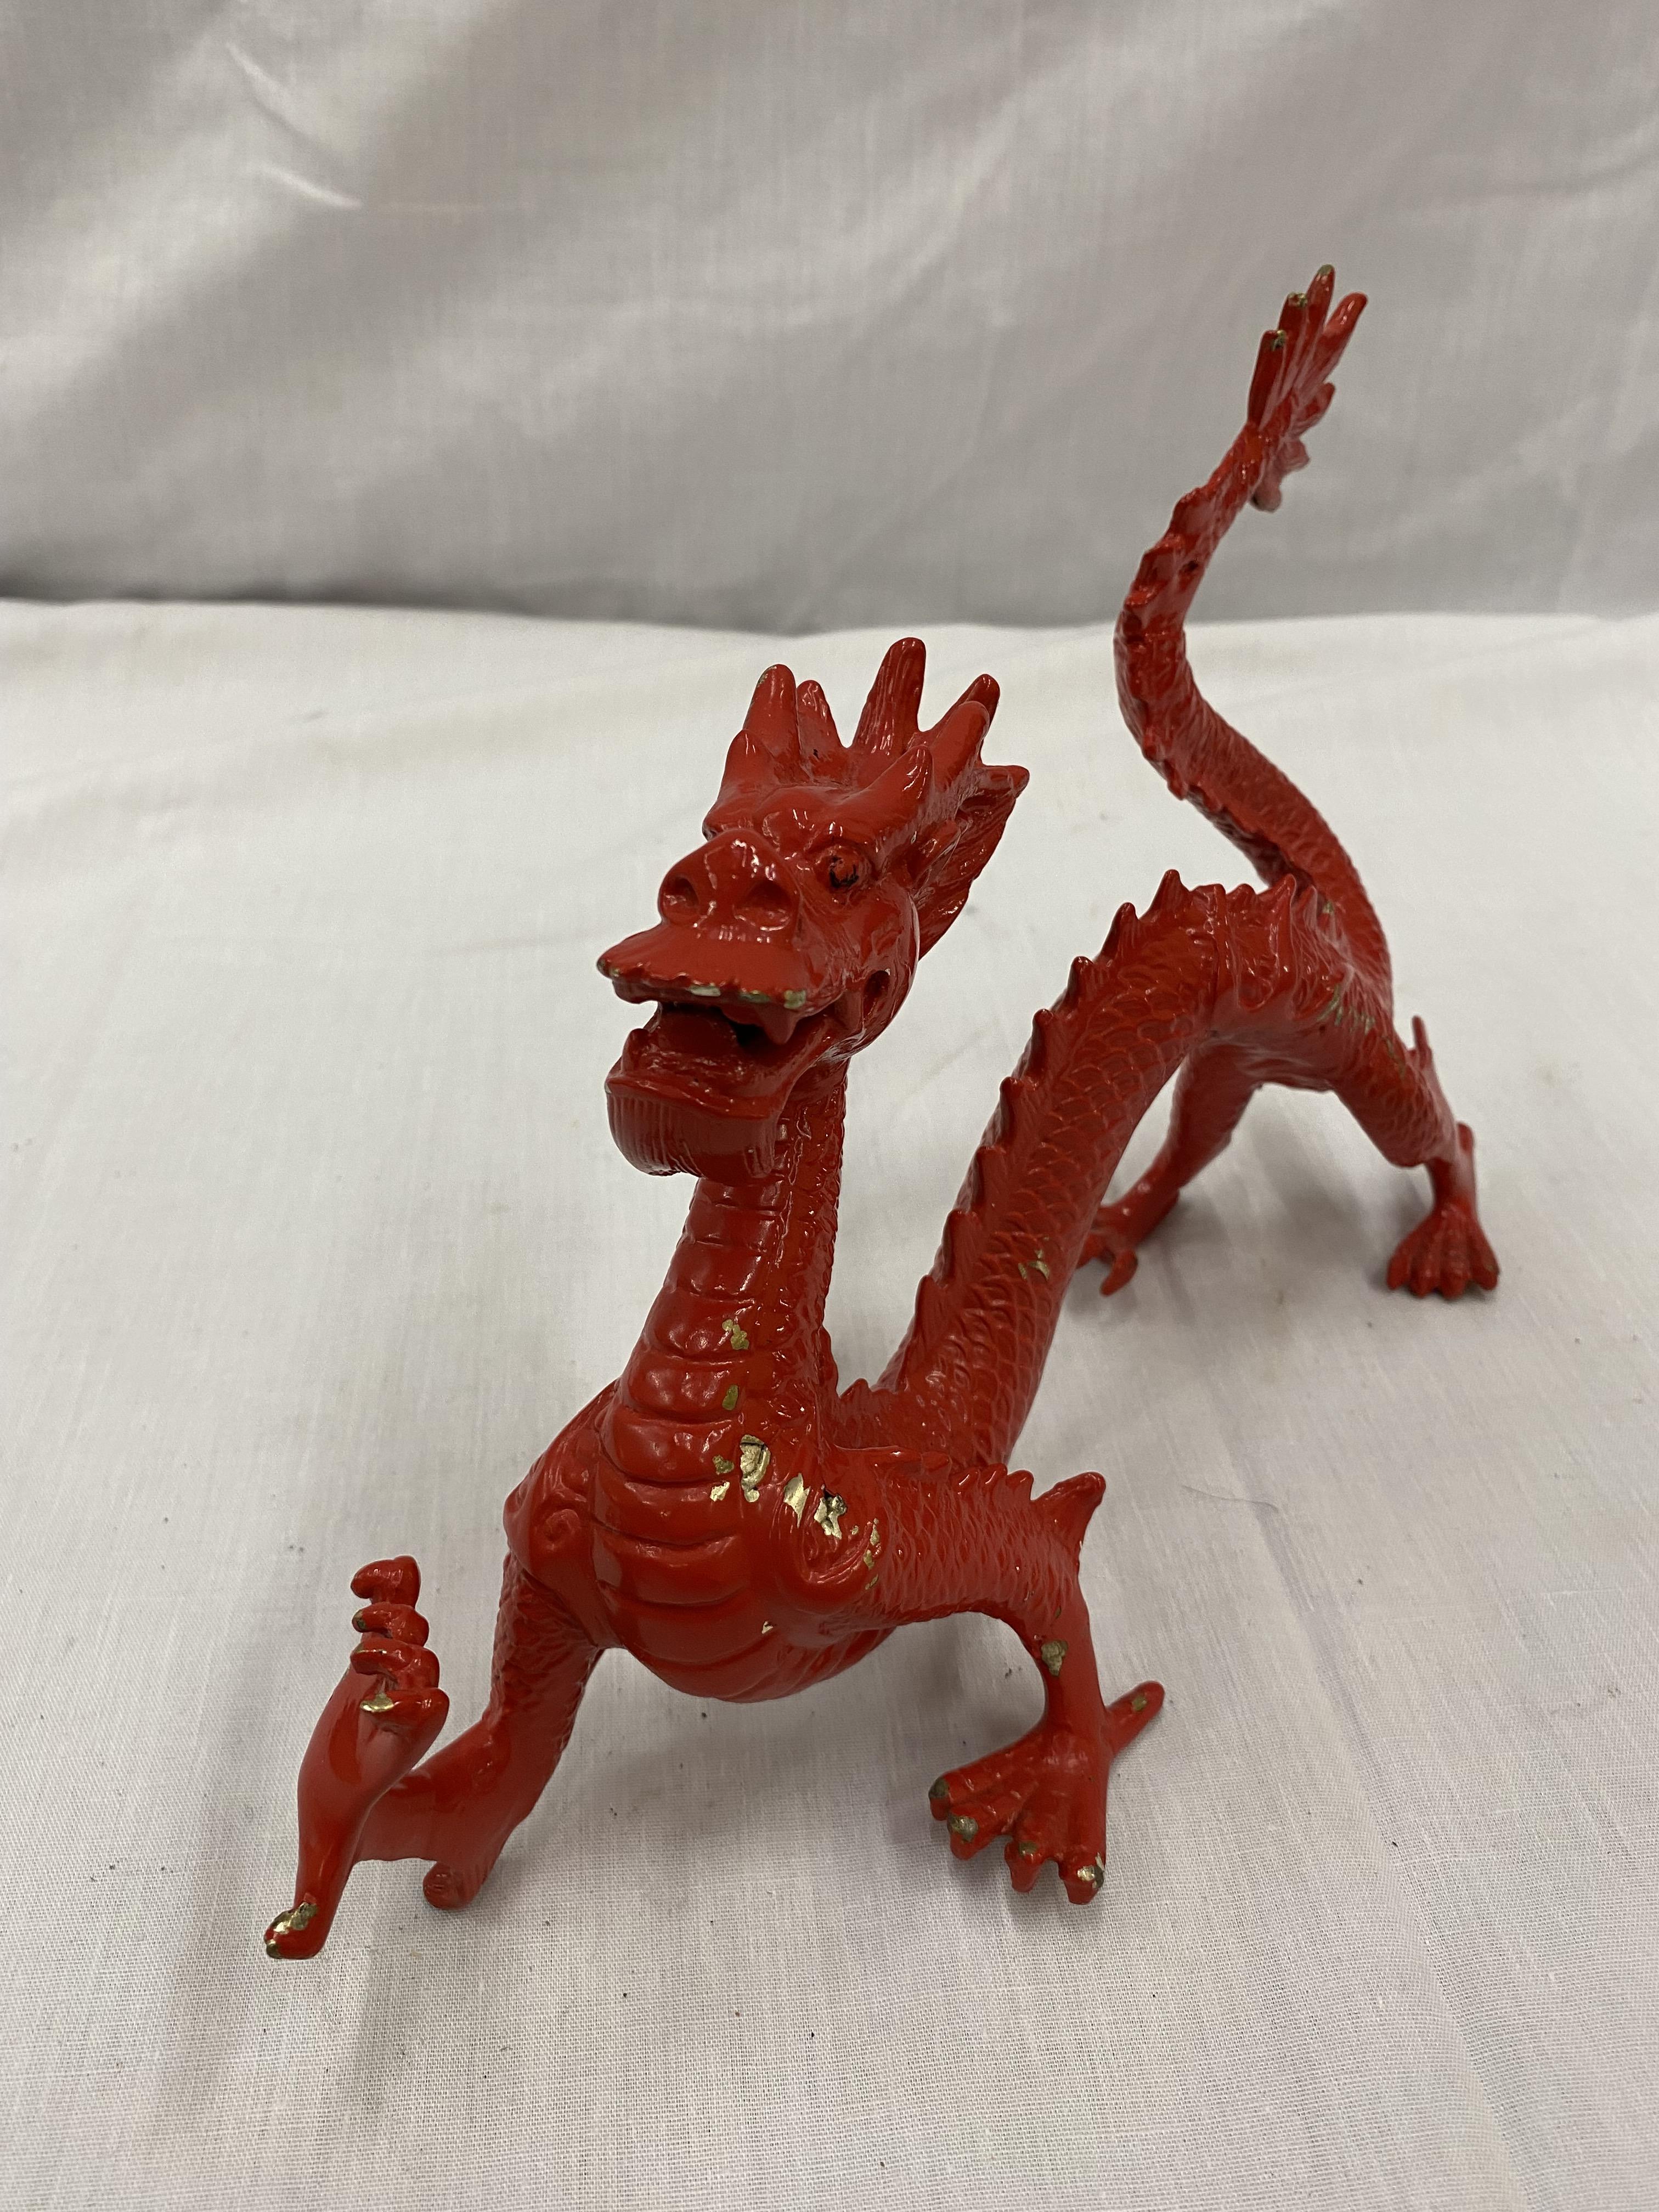 A METAL SCULPTURE OF A RED DRAGON HEIGHT 17CM, LENGTH APPROX 28CM - Image 8 of 8